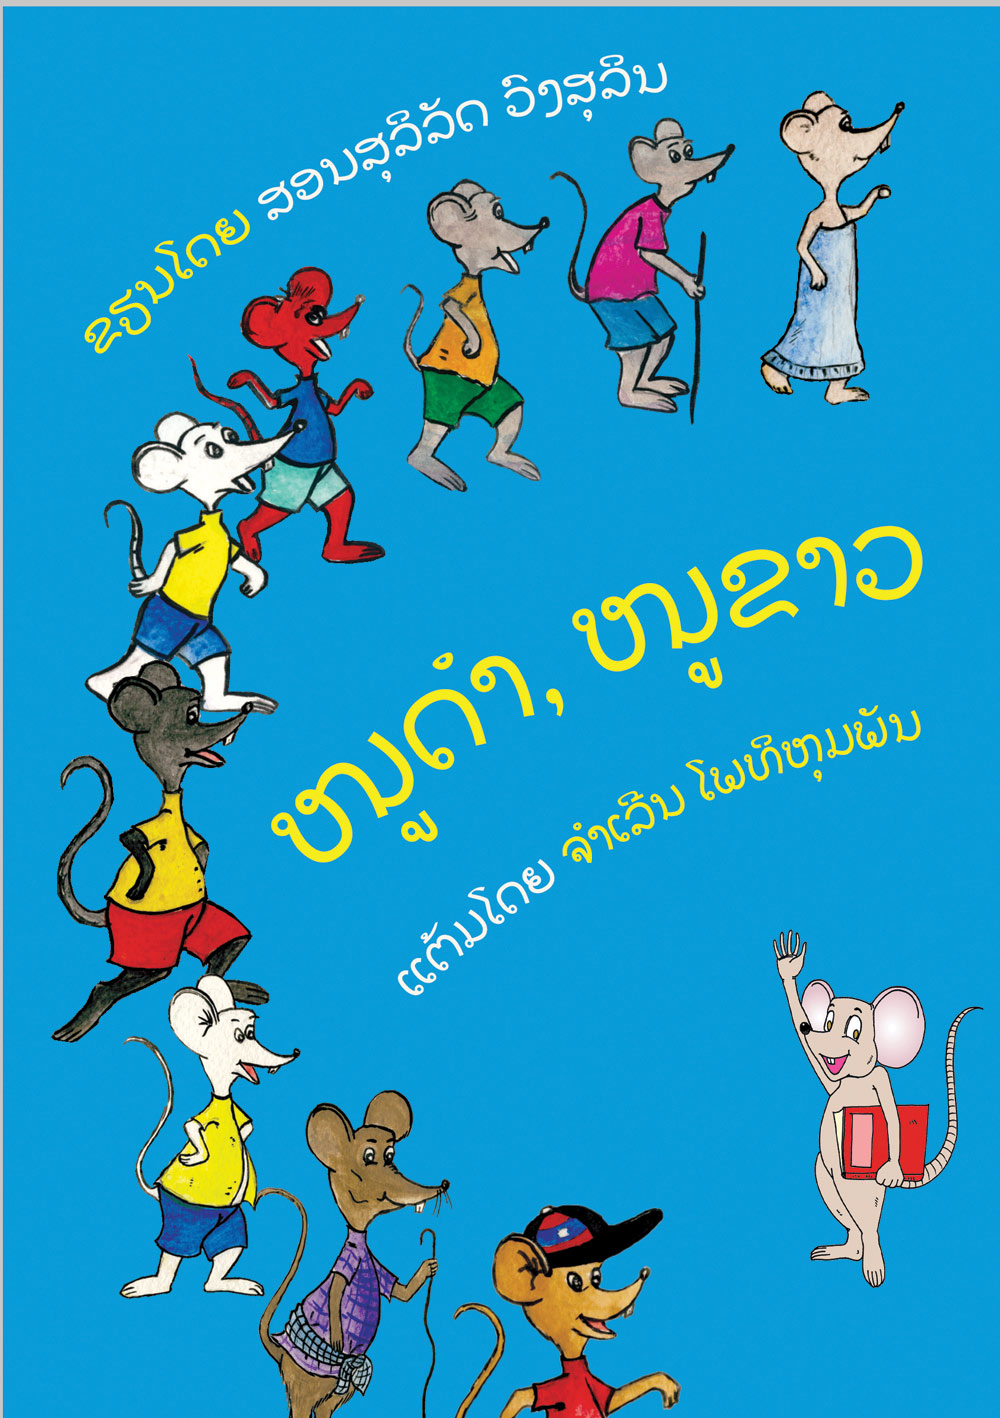 Black Mouse, White Mouse large book cover, published in Lao language